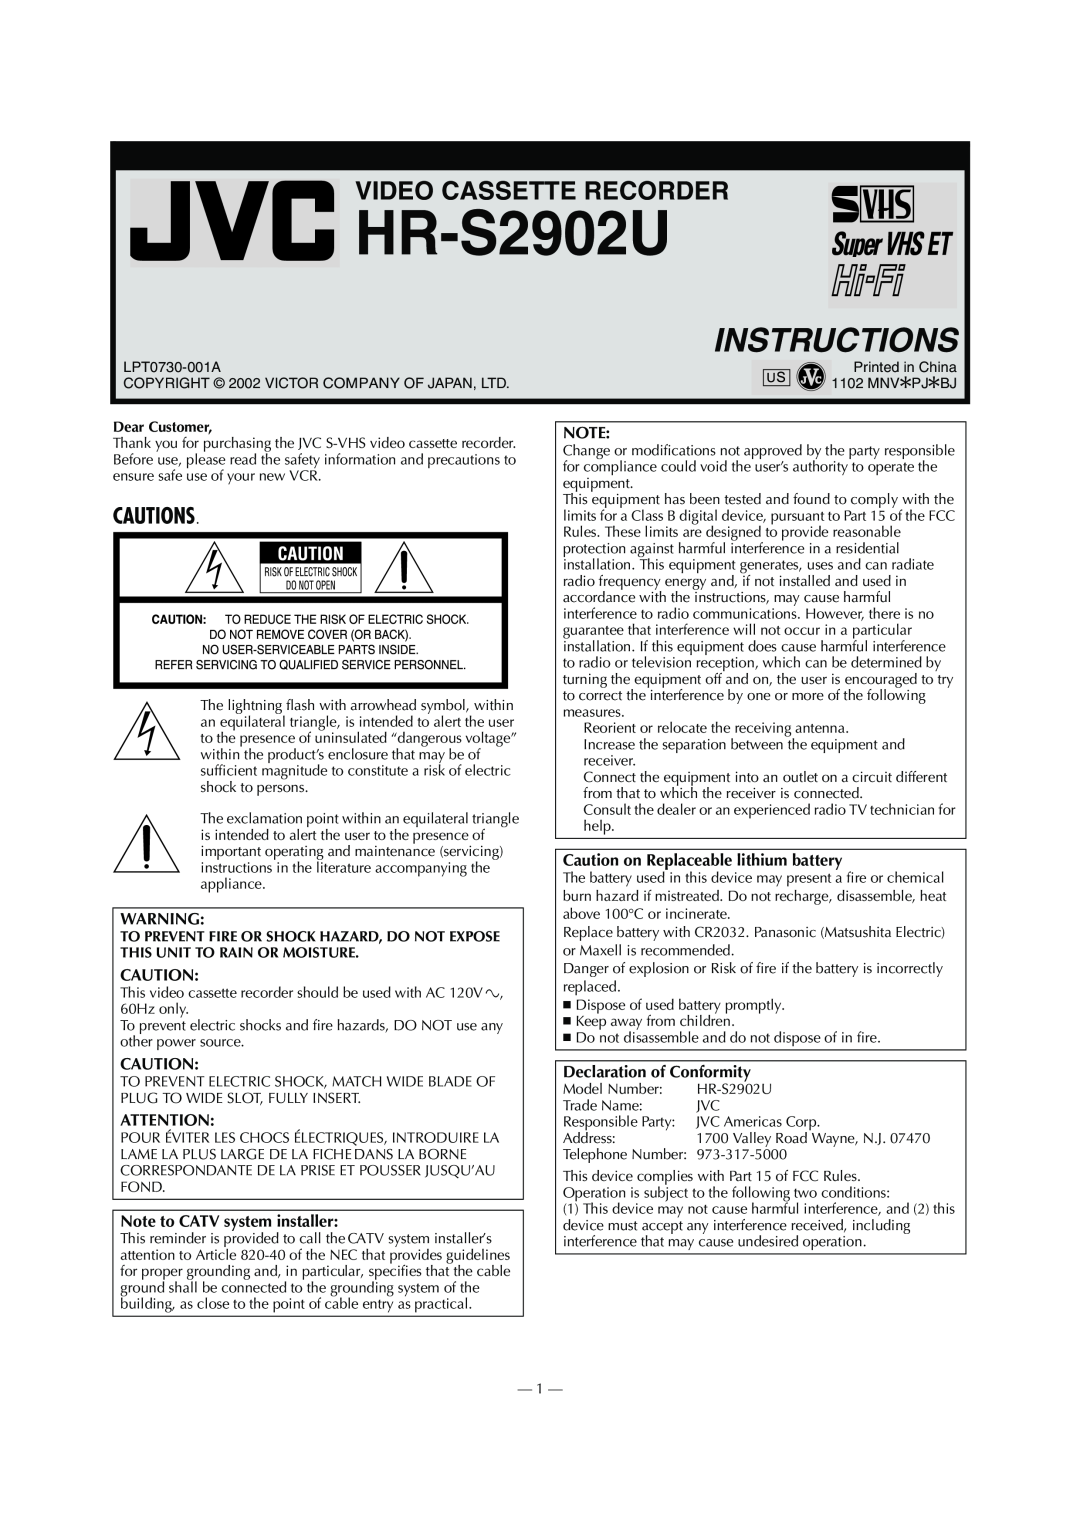 JVC HR-S2902U manual Video Cassette Recorder, Cautions, Note to CATV system installer, Declaration of Conformity 